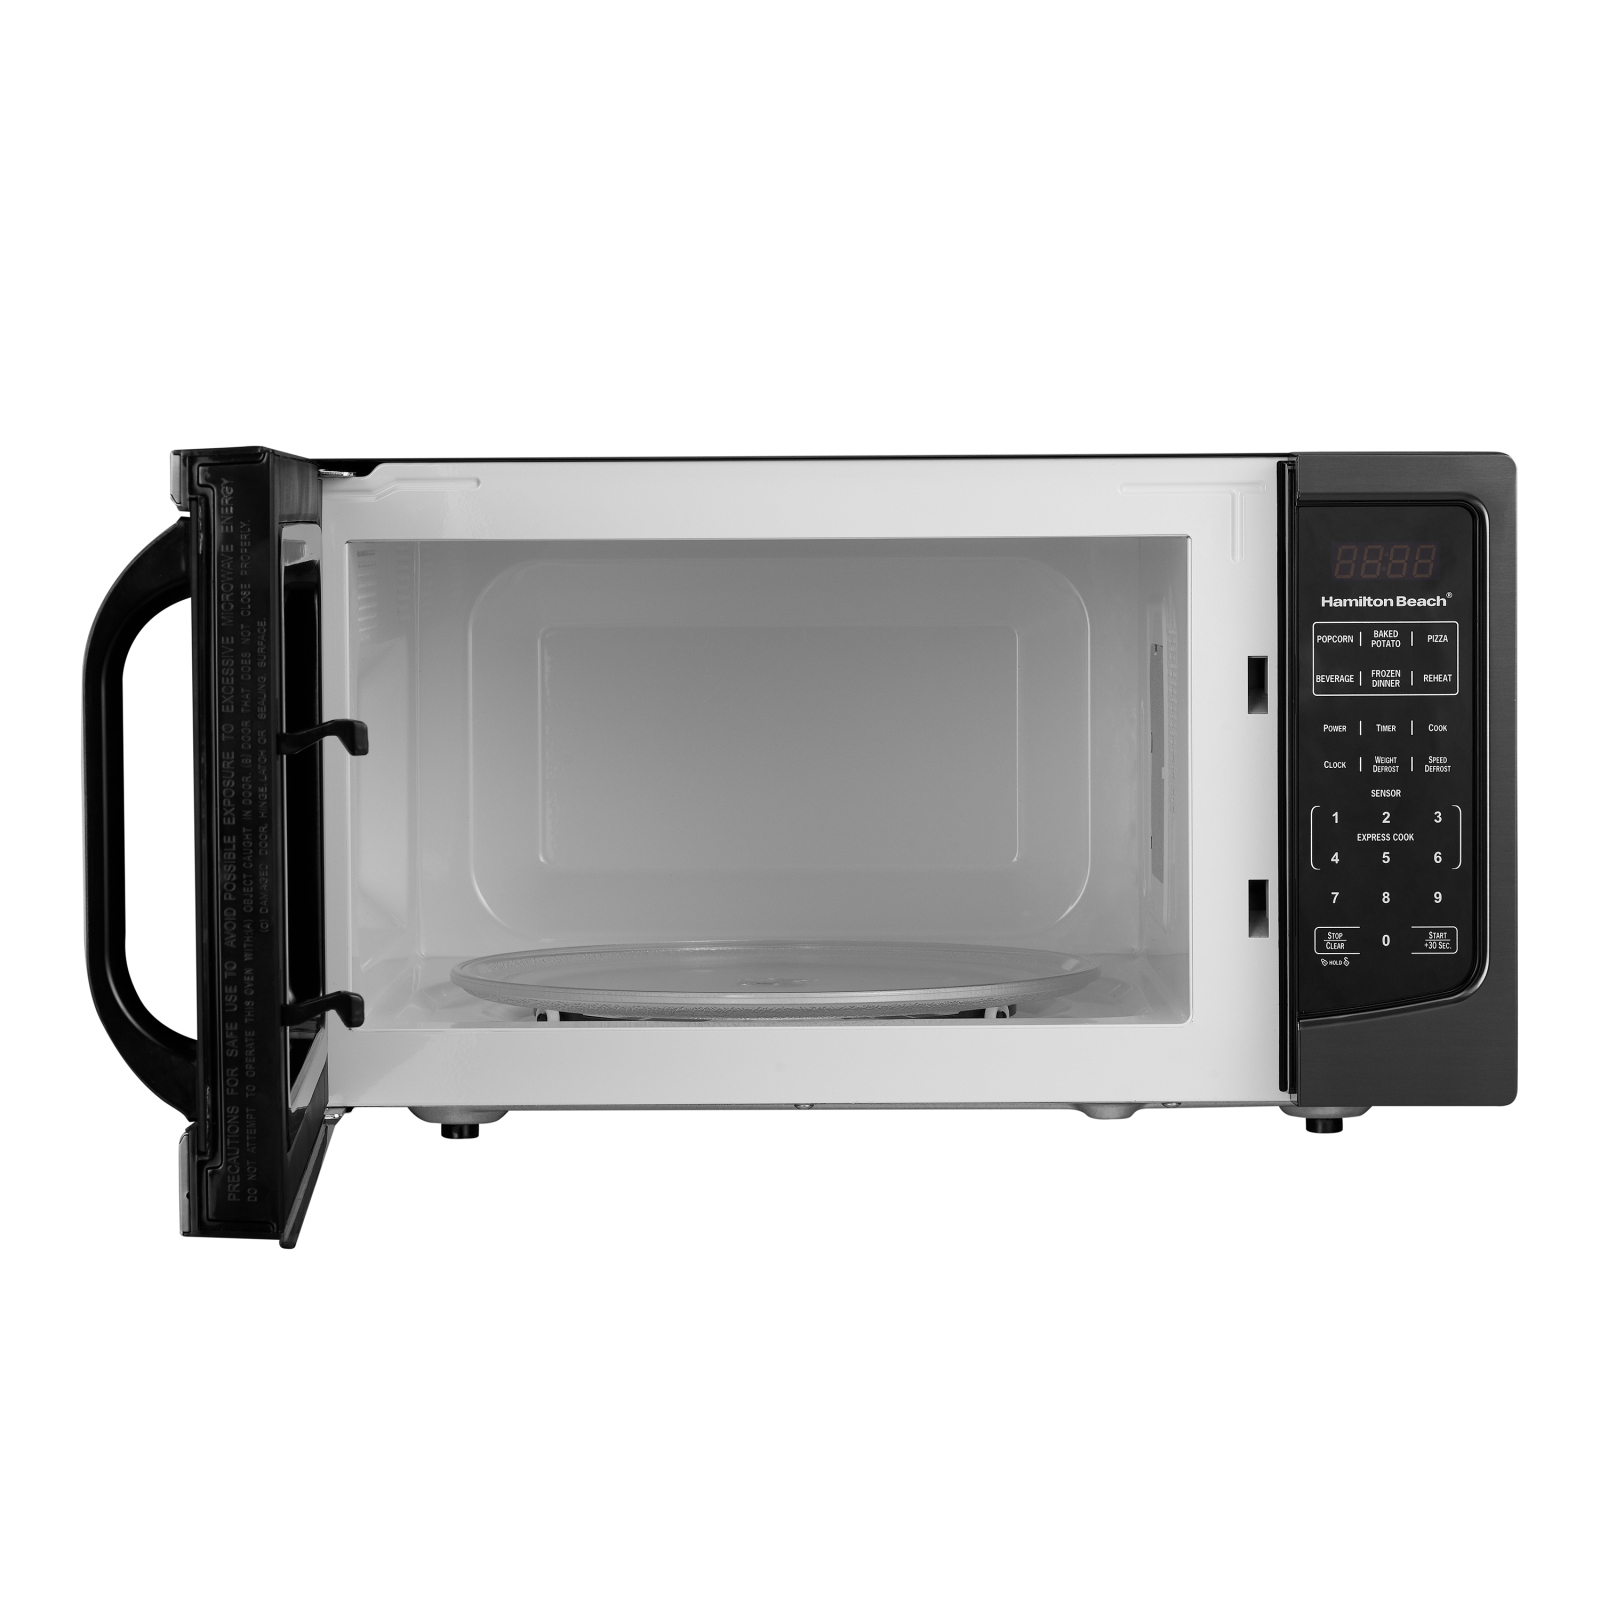 Hamilton Beach 1.6 Cu ft Black Stainless Steel Digital Microwave Oven, New - image 3 of 5